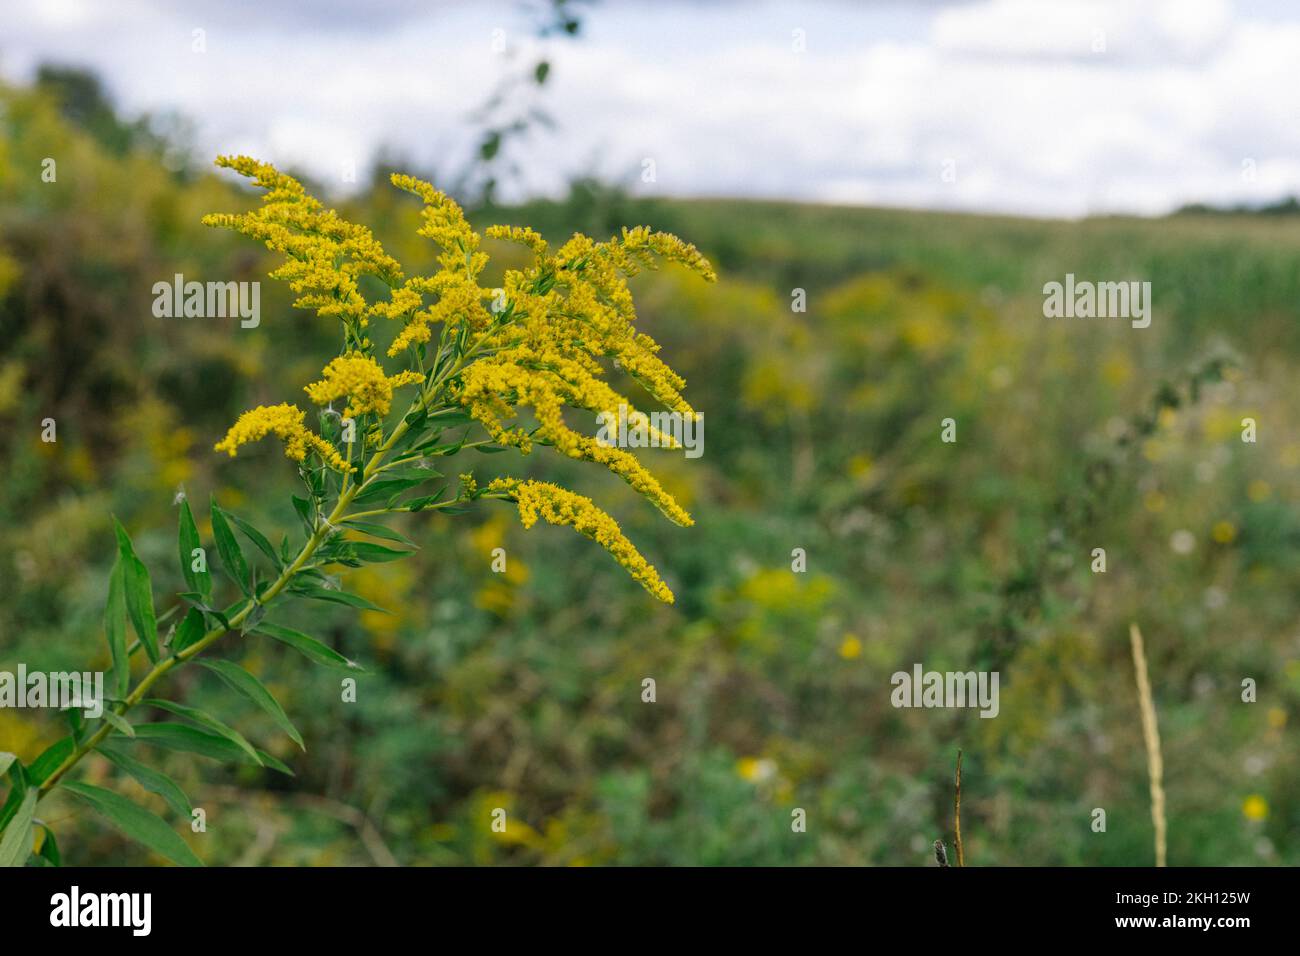 Yellow flowers of goldenrod. Weed culture grows in the field. Stock Photo